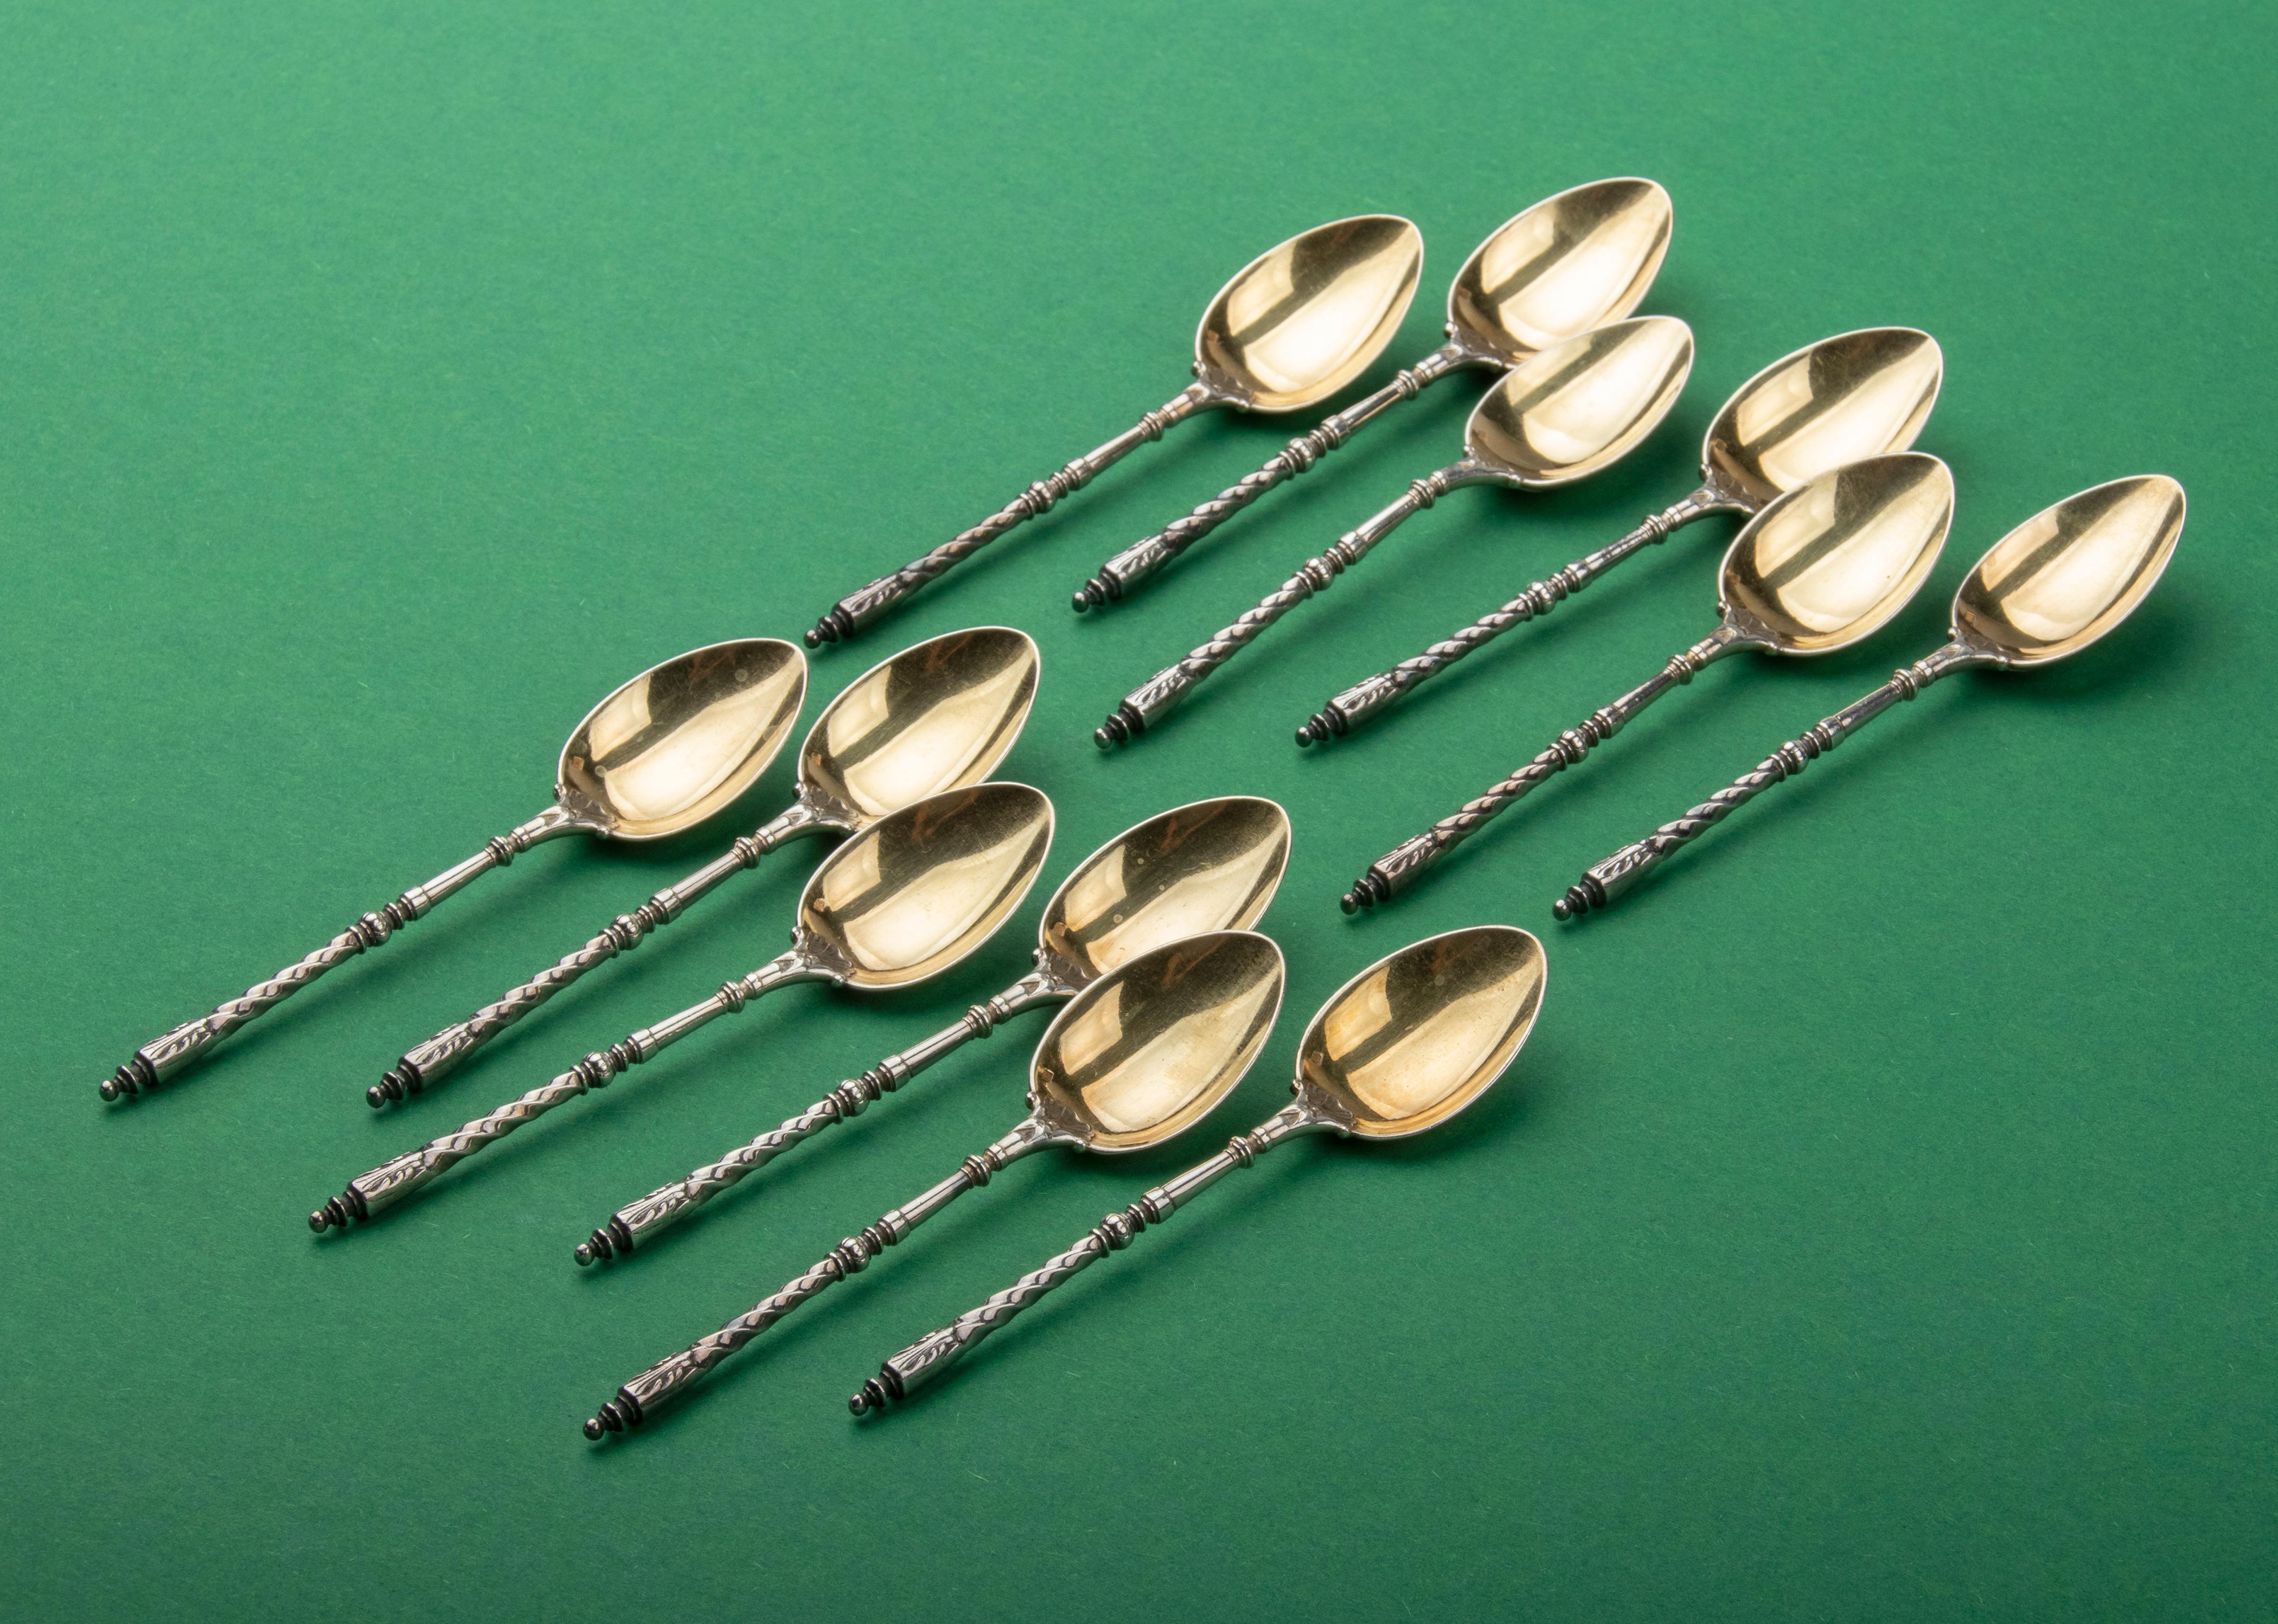 Set of 12 Antique Silver-Plated and Gilded Tea spoons made by Christofle For Sale 5